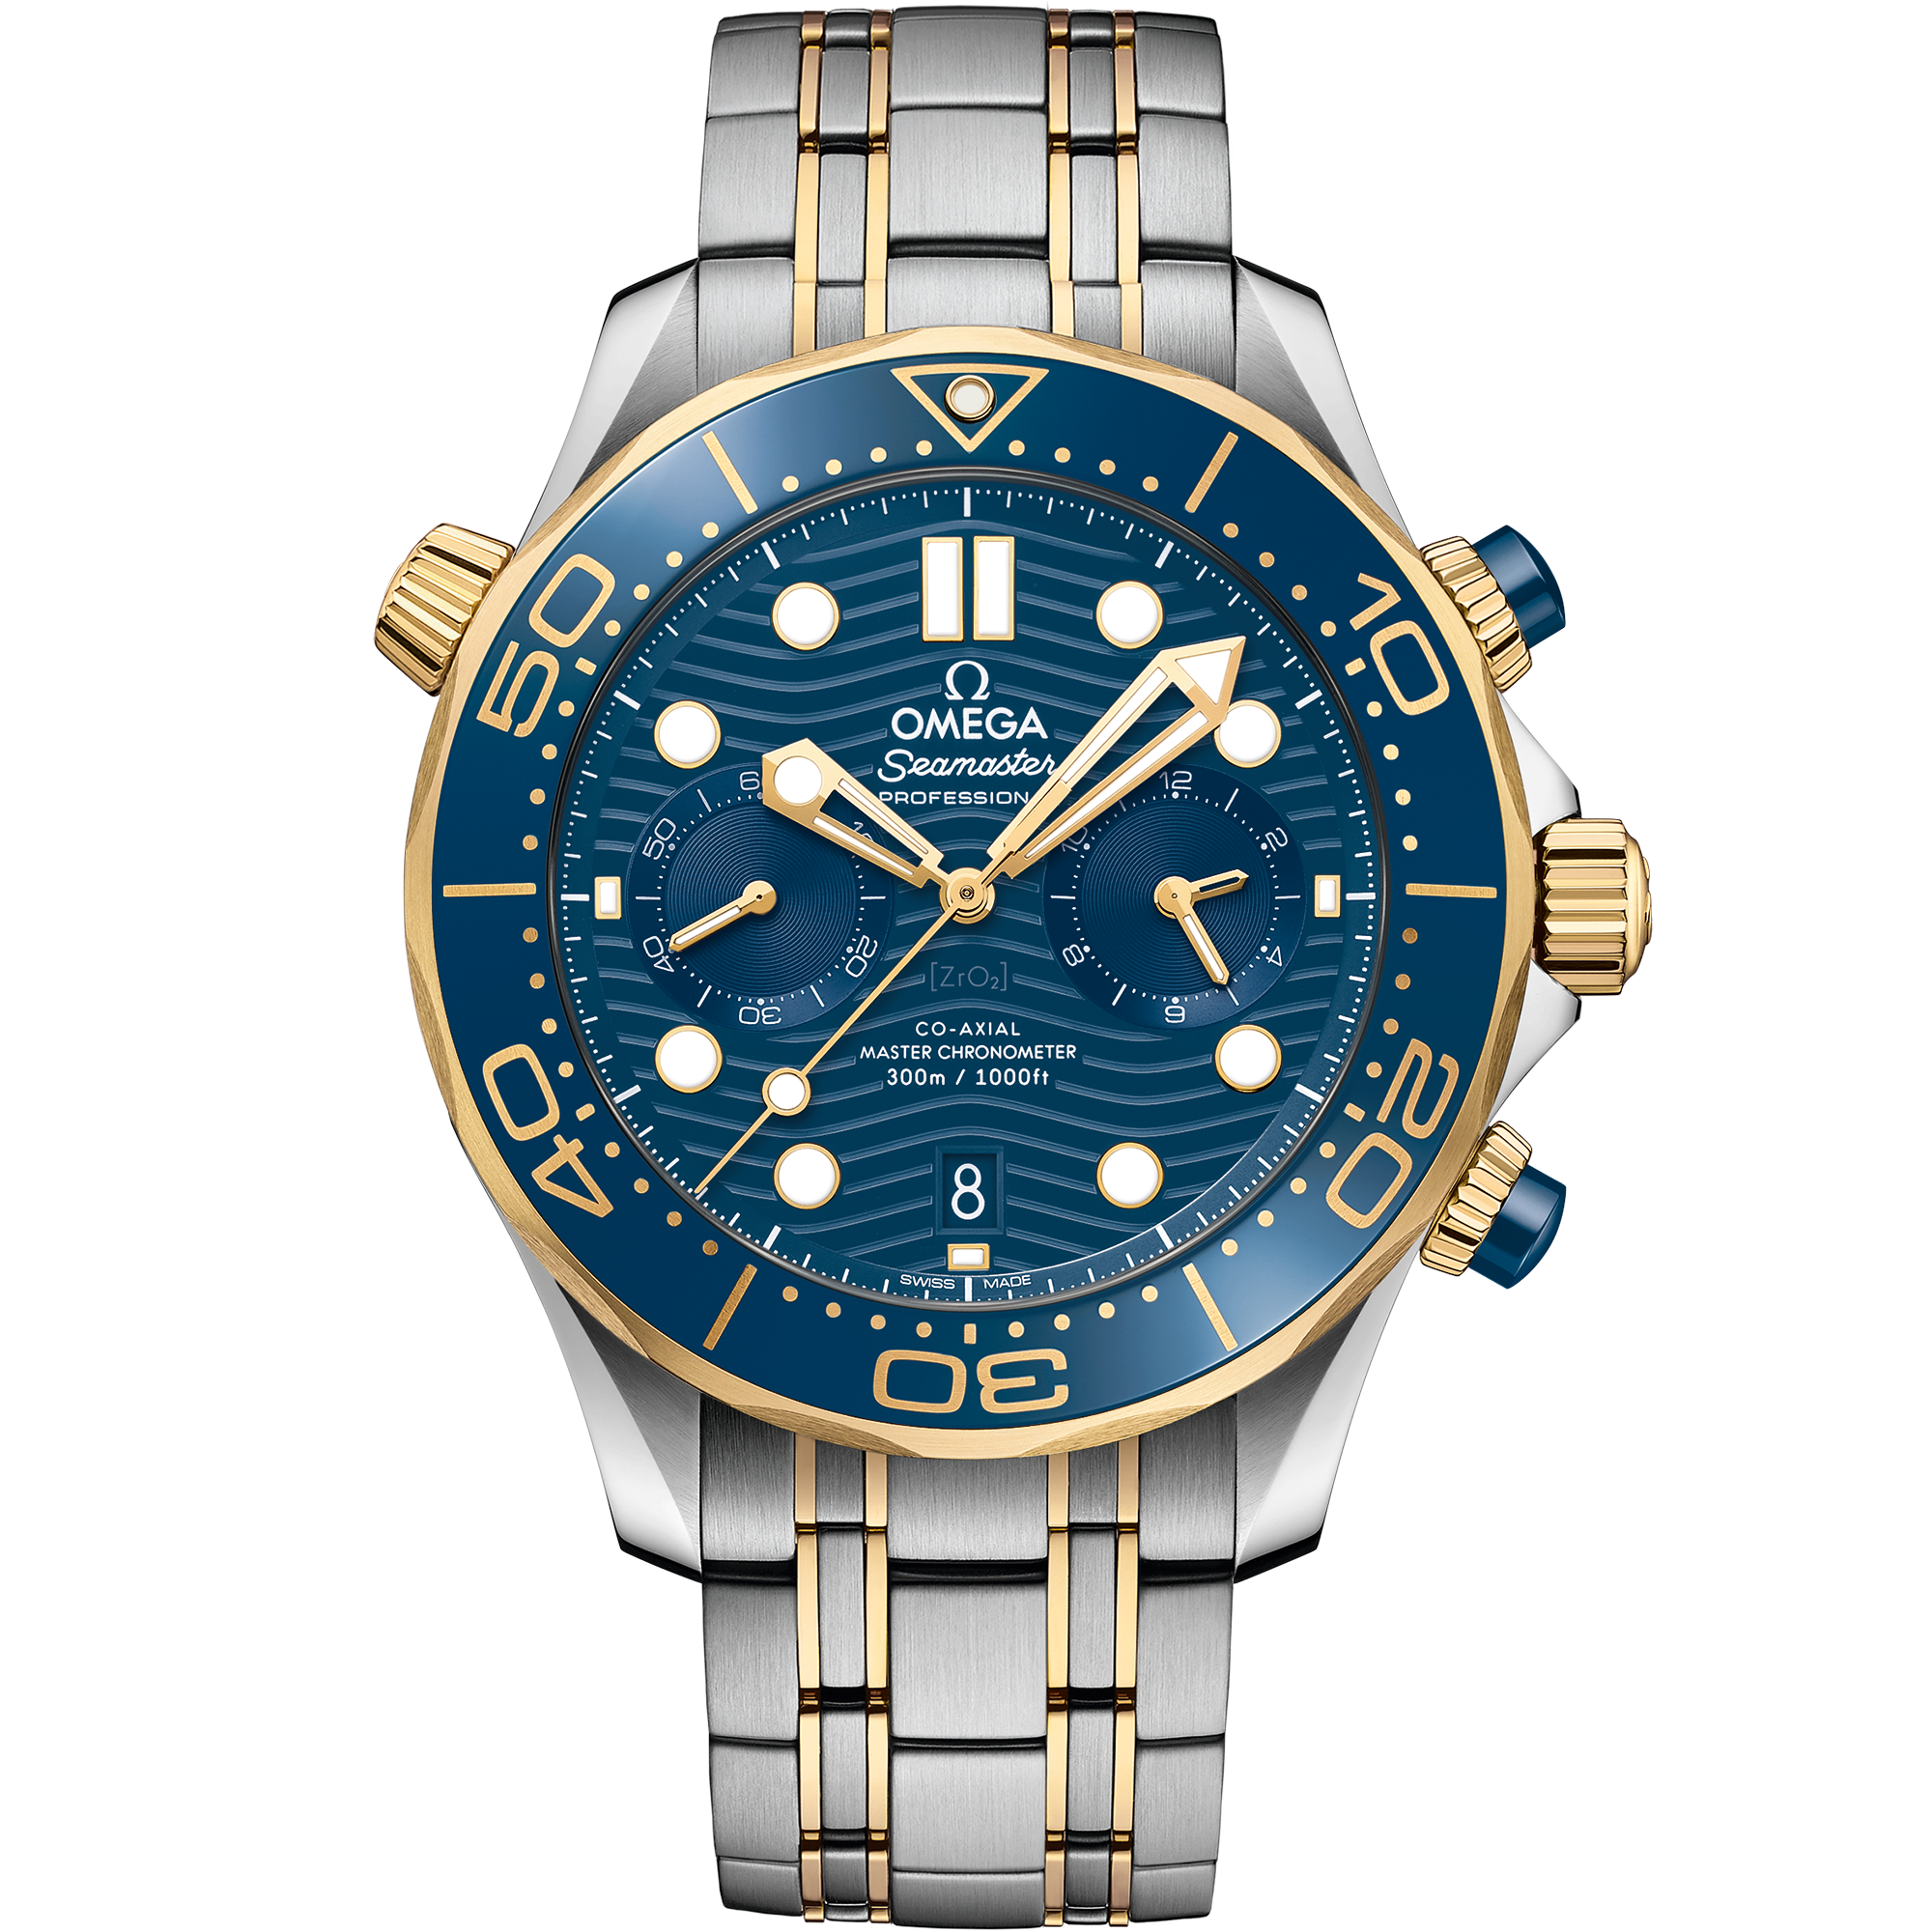 Seamaster Diver 300M 44 mm, steel - yellow gold on steel - yellow gold - 210.20.44.51.03.001